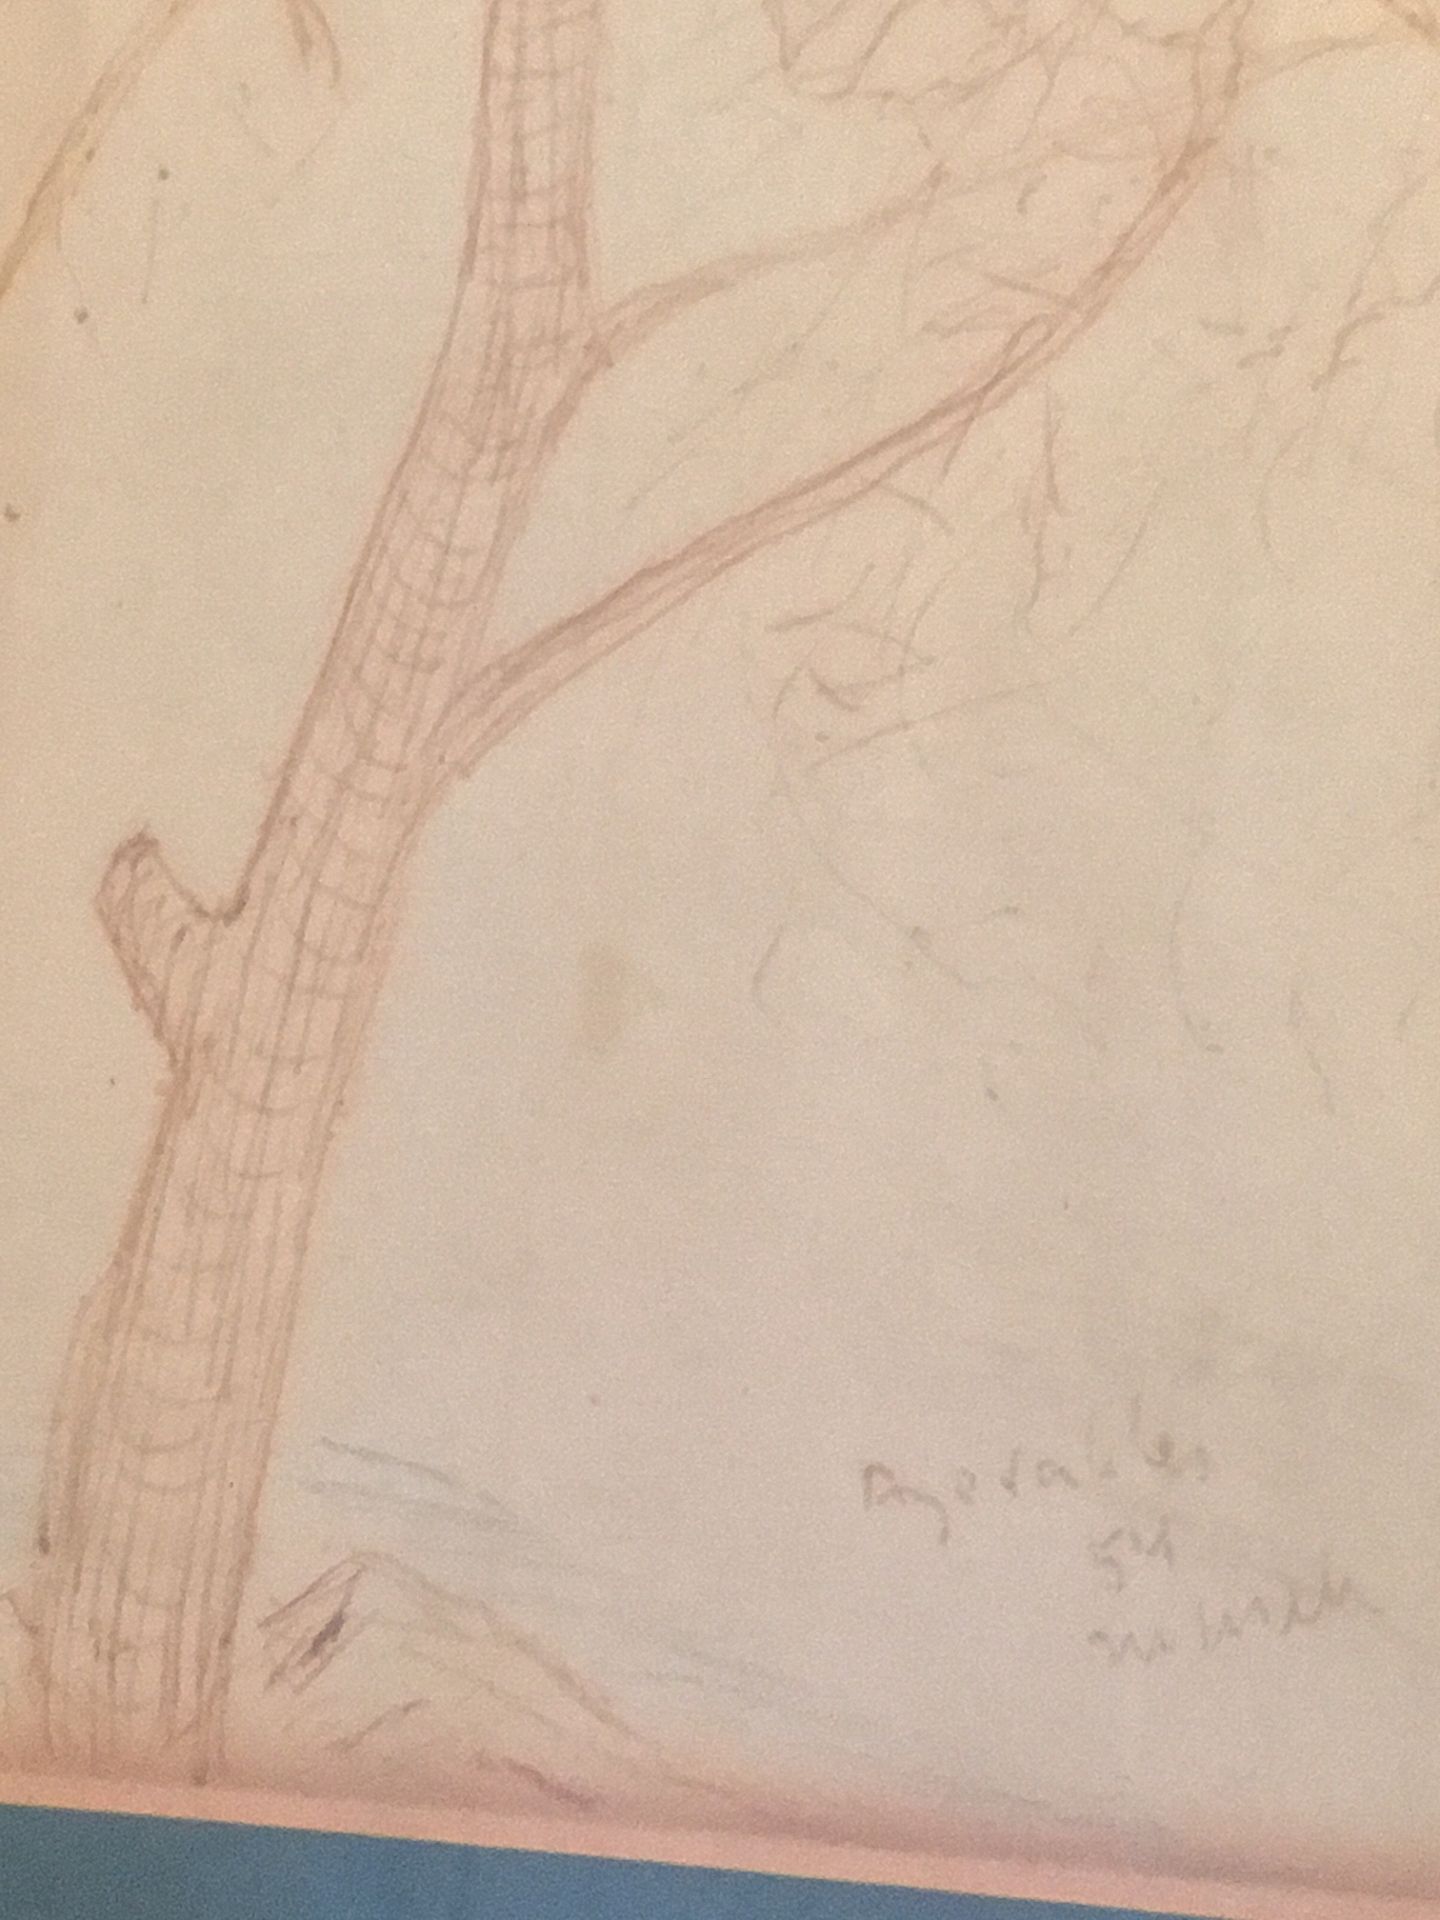 Red Tree sketch signed by Marek Szwarc, 41 x 50 cms 1954 - Image 5 of 6